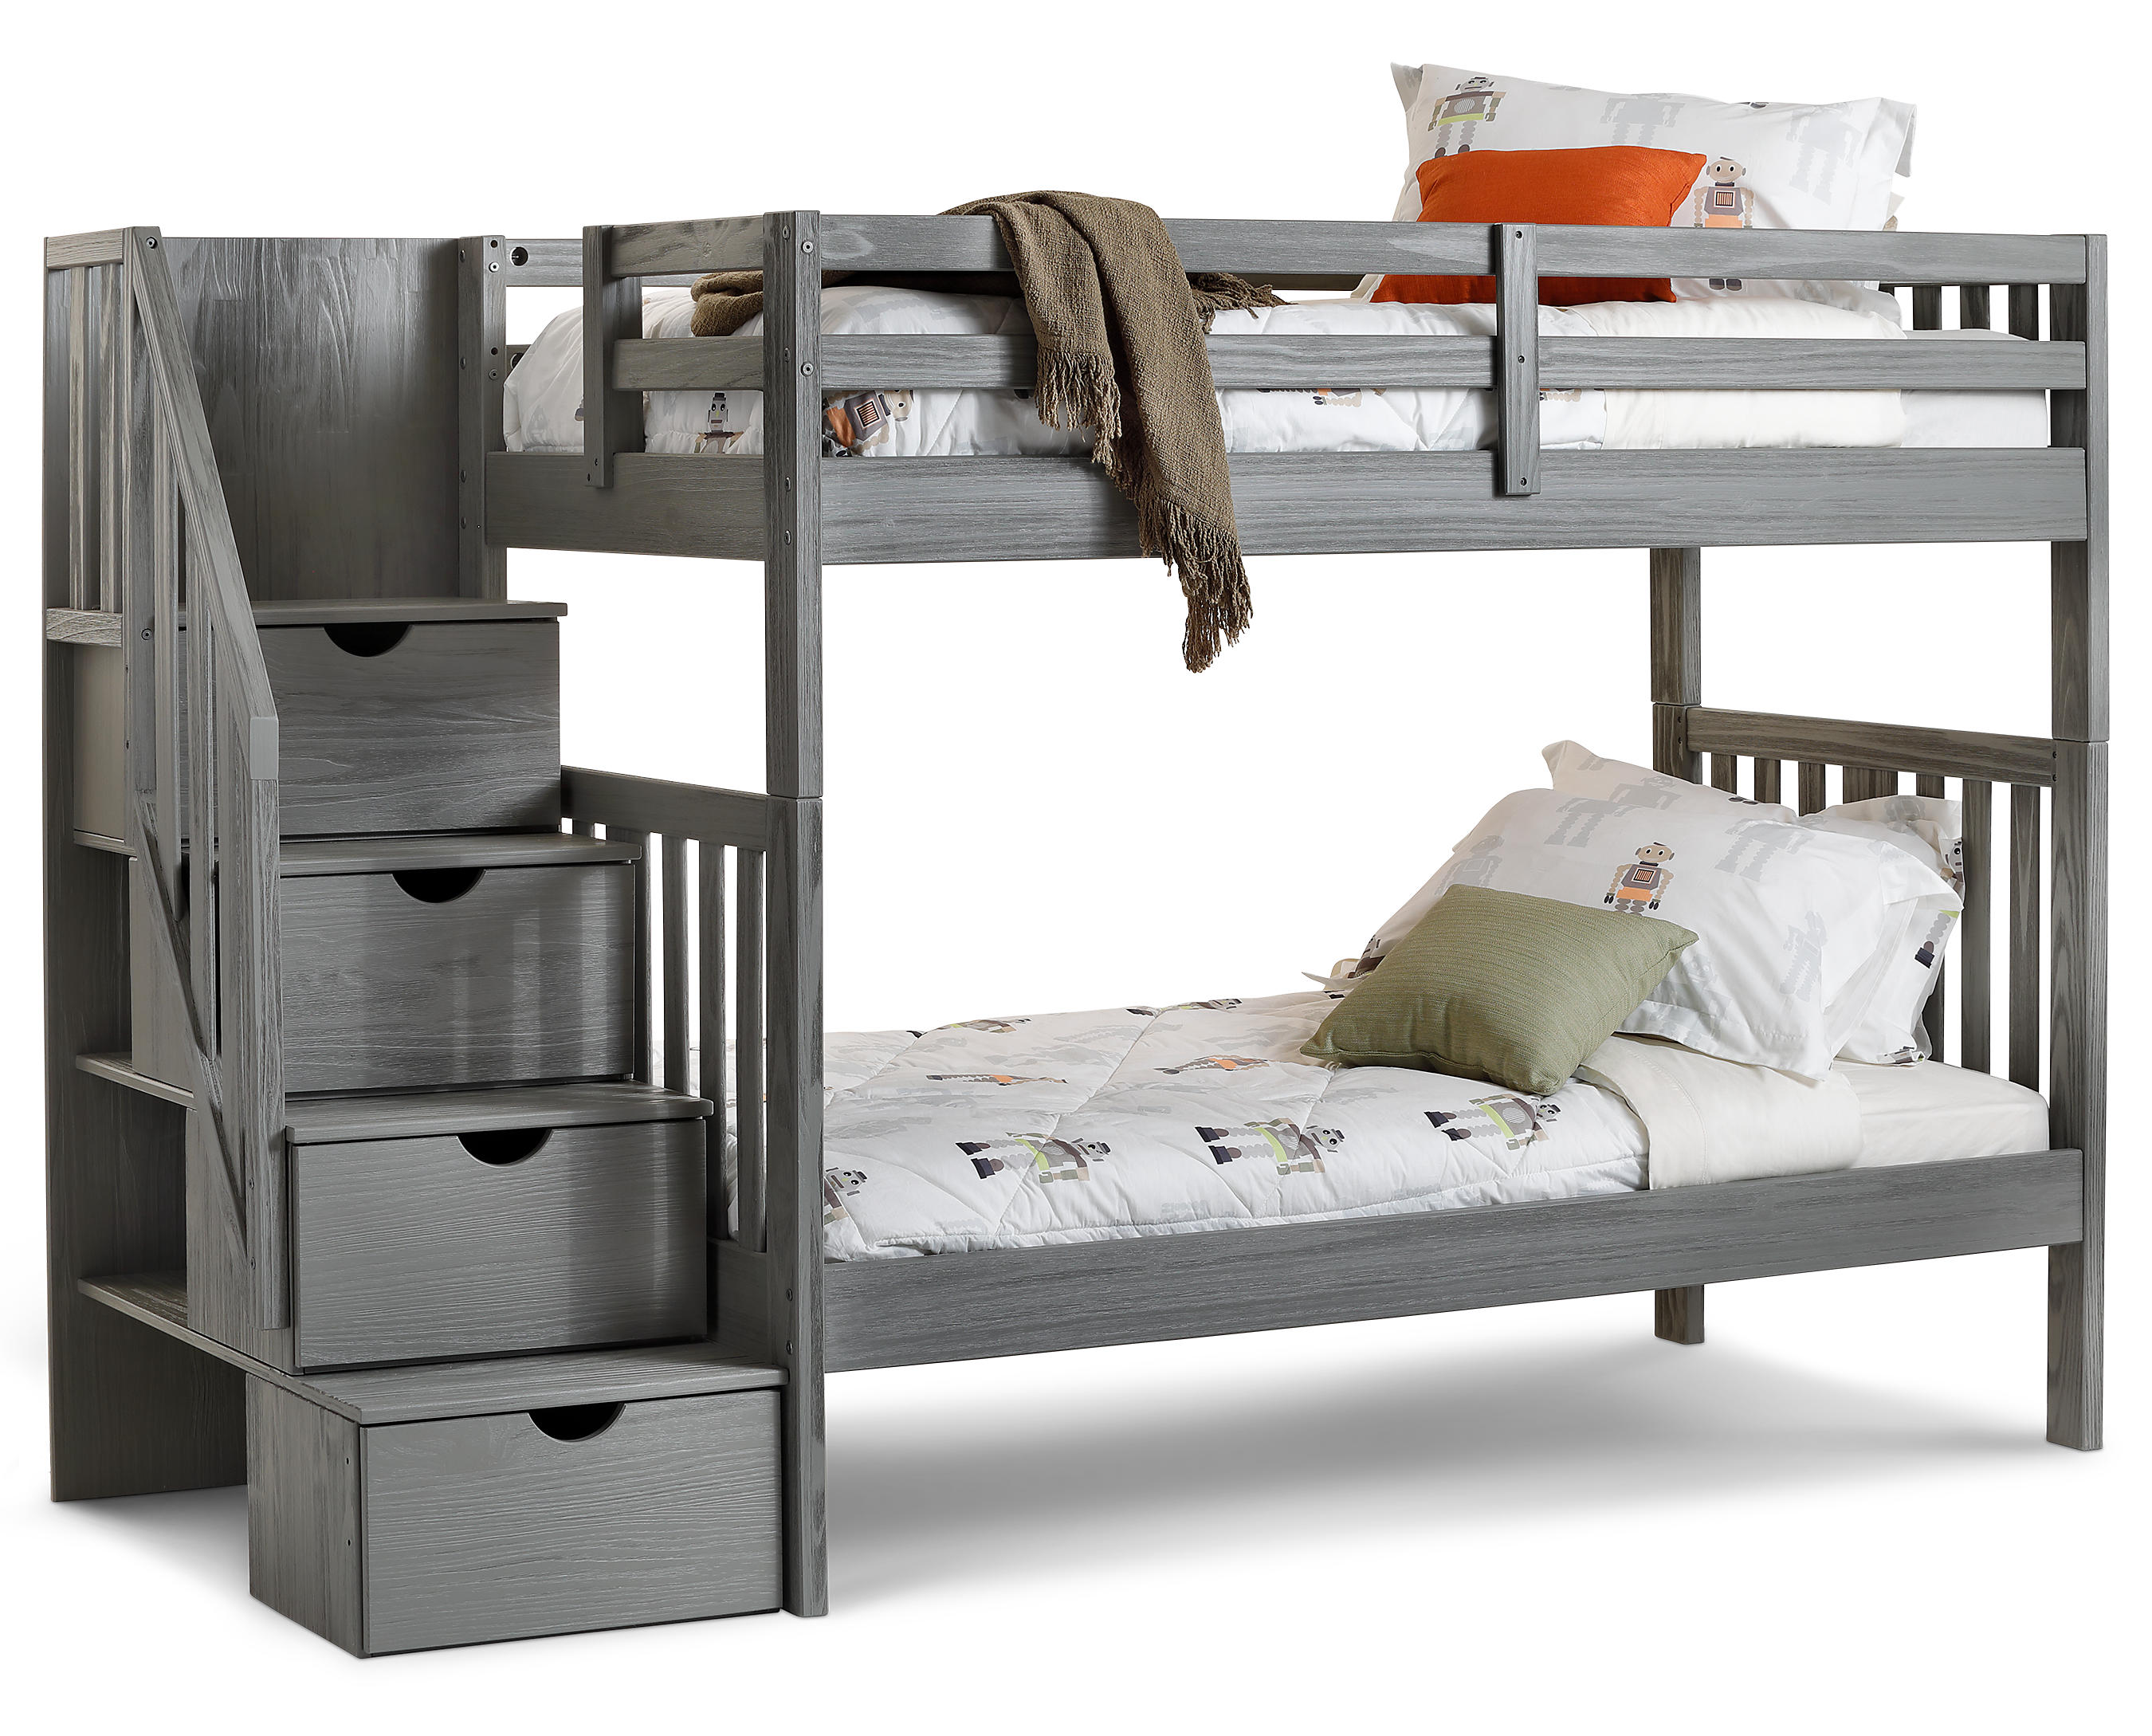 Dove Bunk Bed With Staircase, Value City Bunk Beds With Stairs